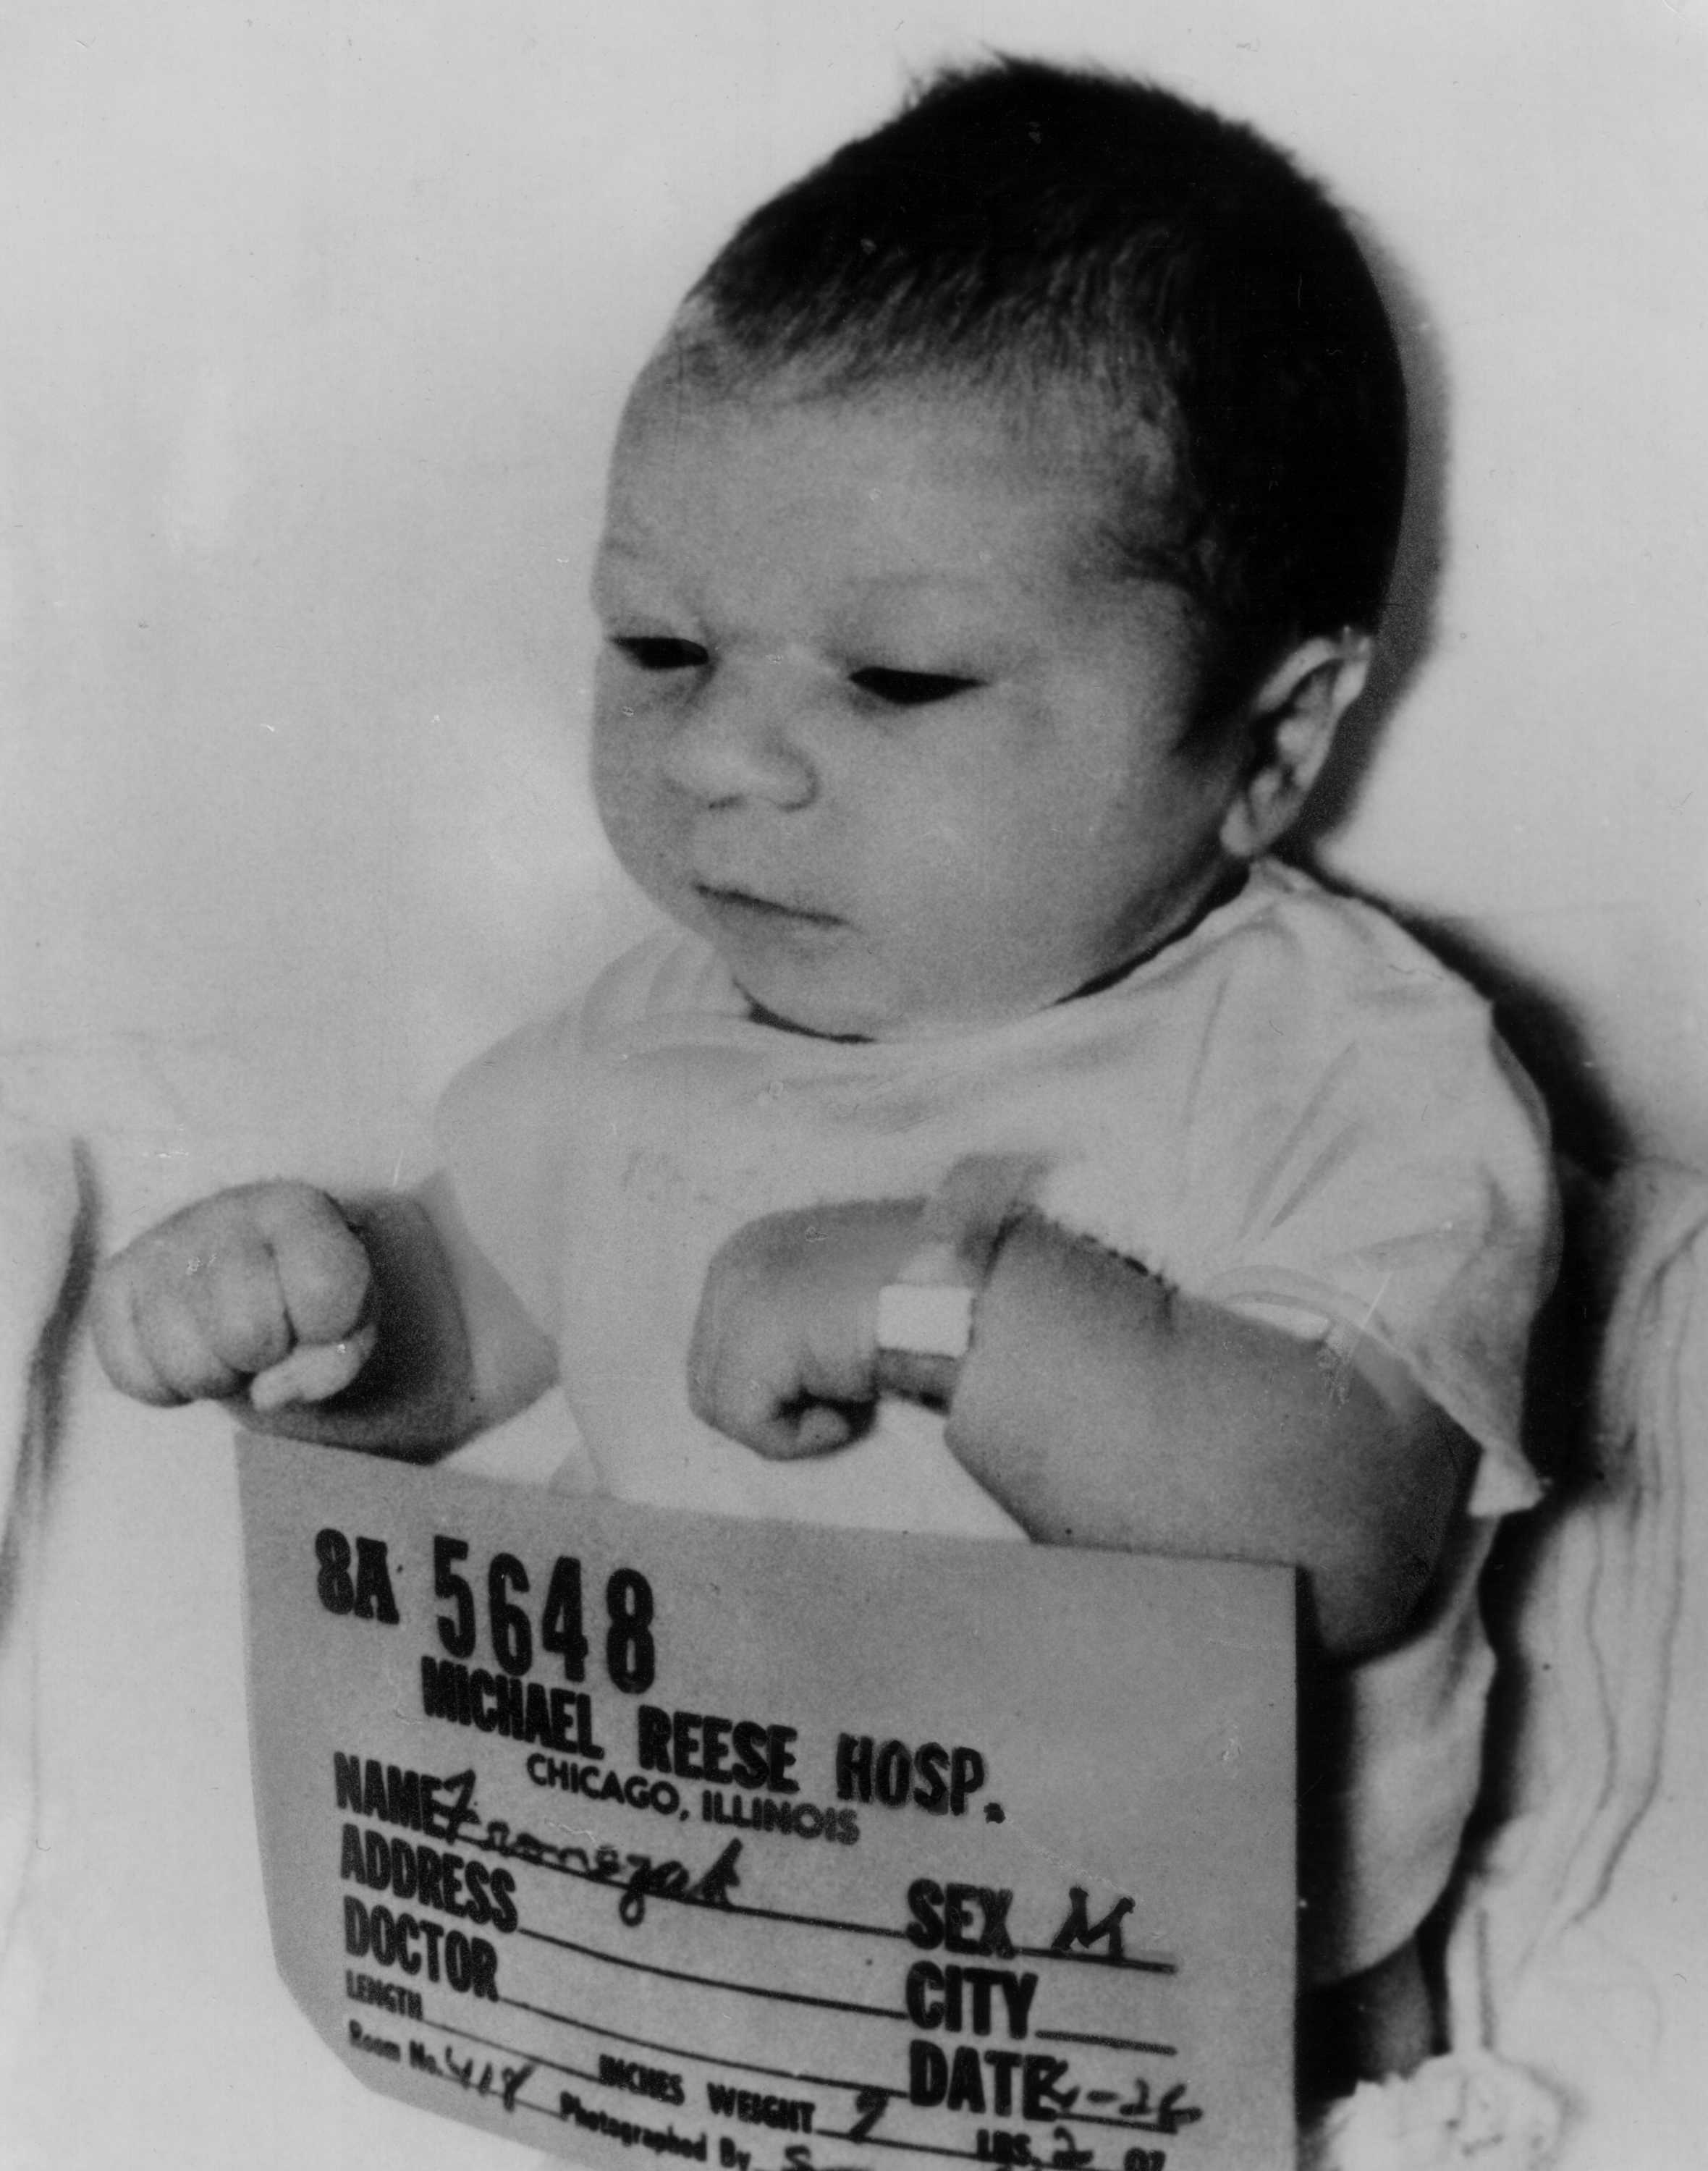 Reports A baby boy kidnapped from a Chicago hospital 55 years ago has been located in Michigan